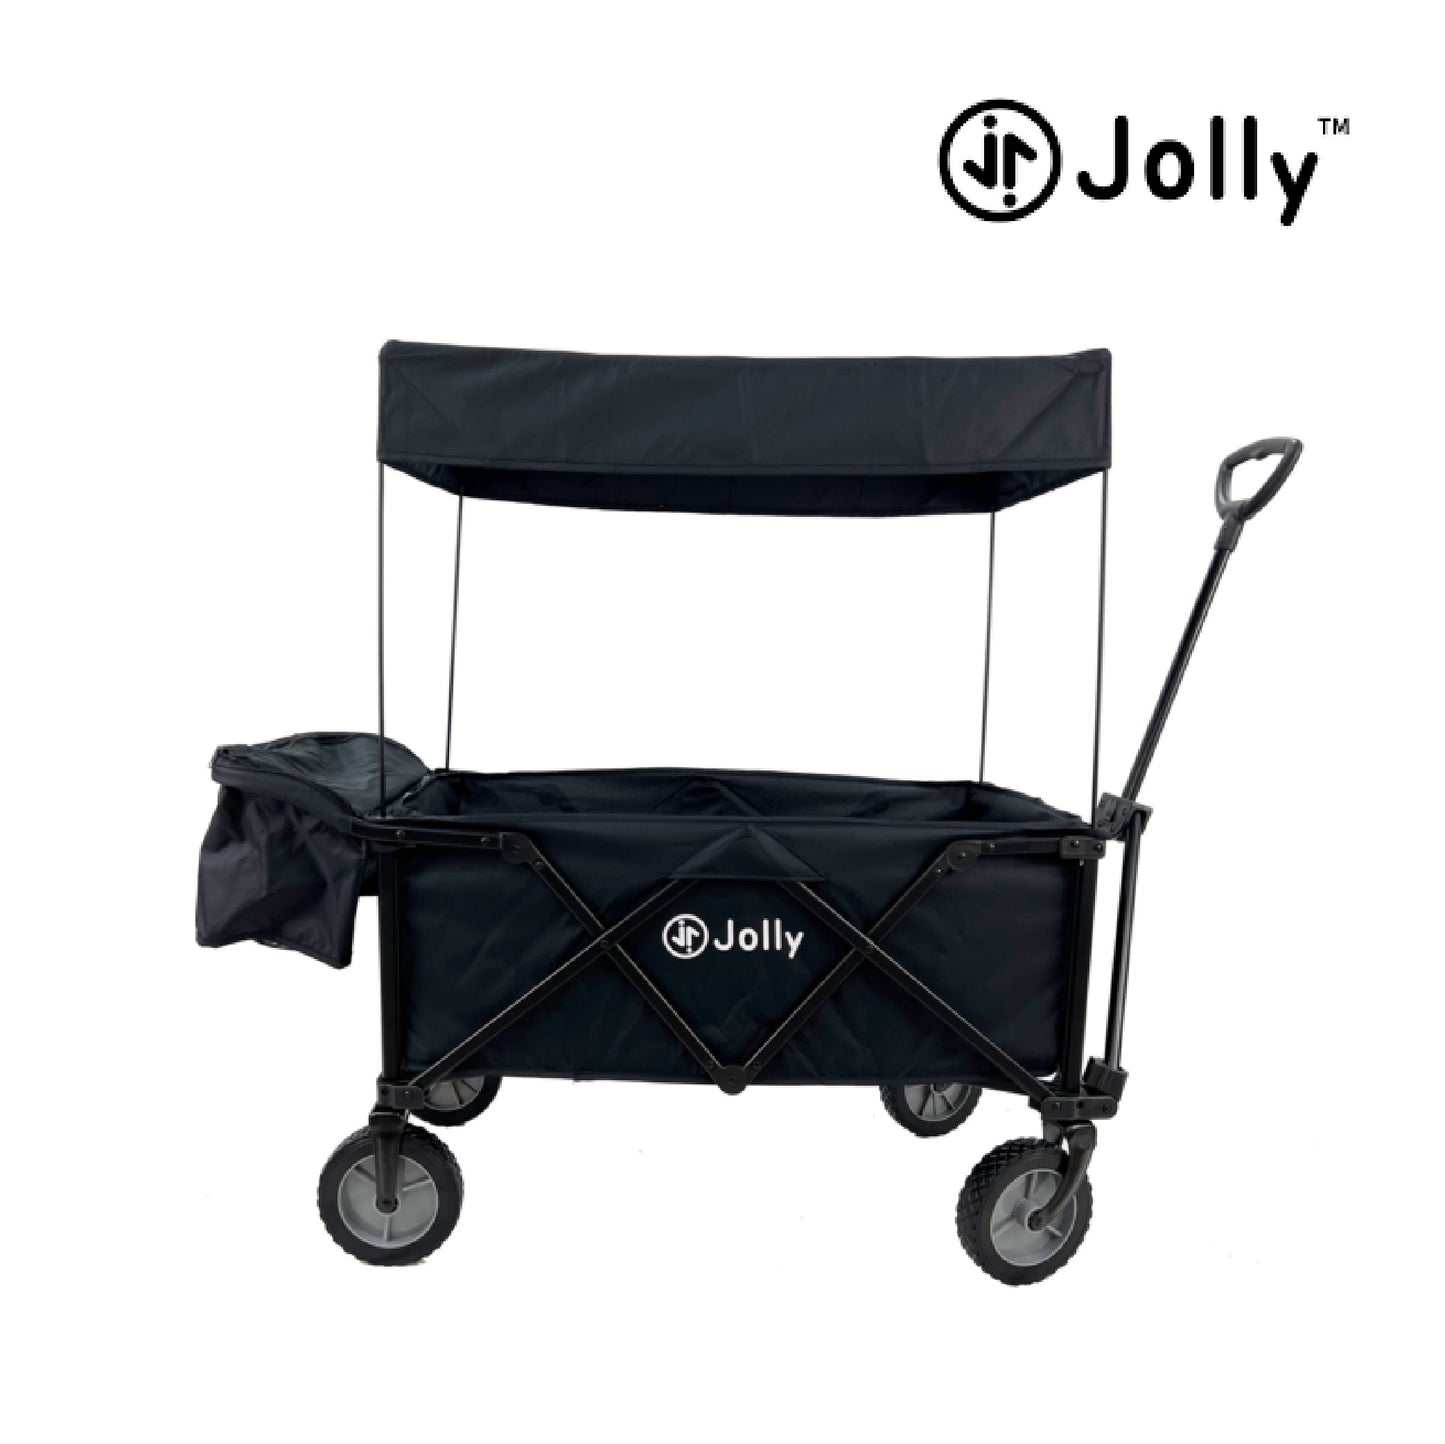 [Jolly UK] Travel Folding Trolley - 3 colors available